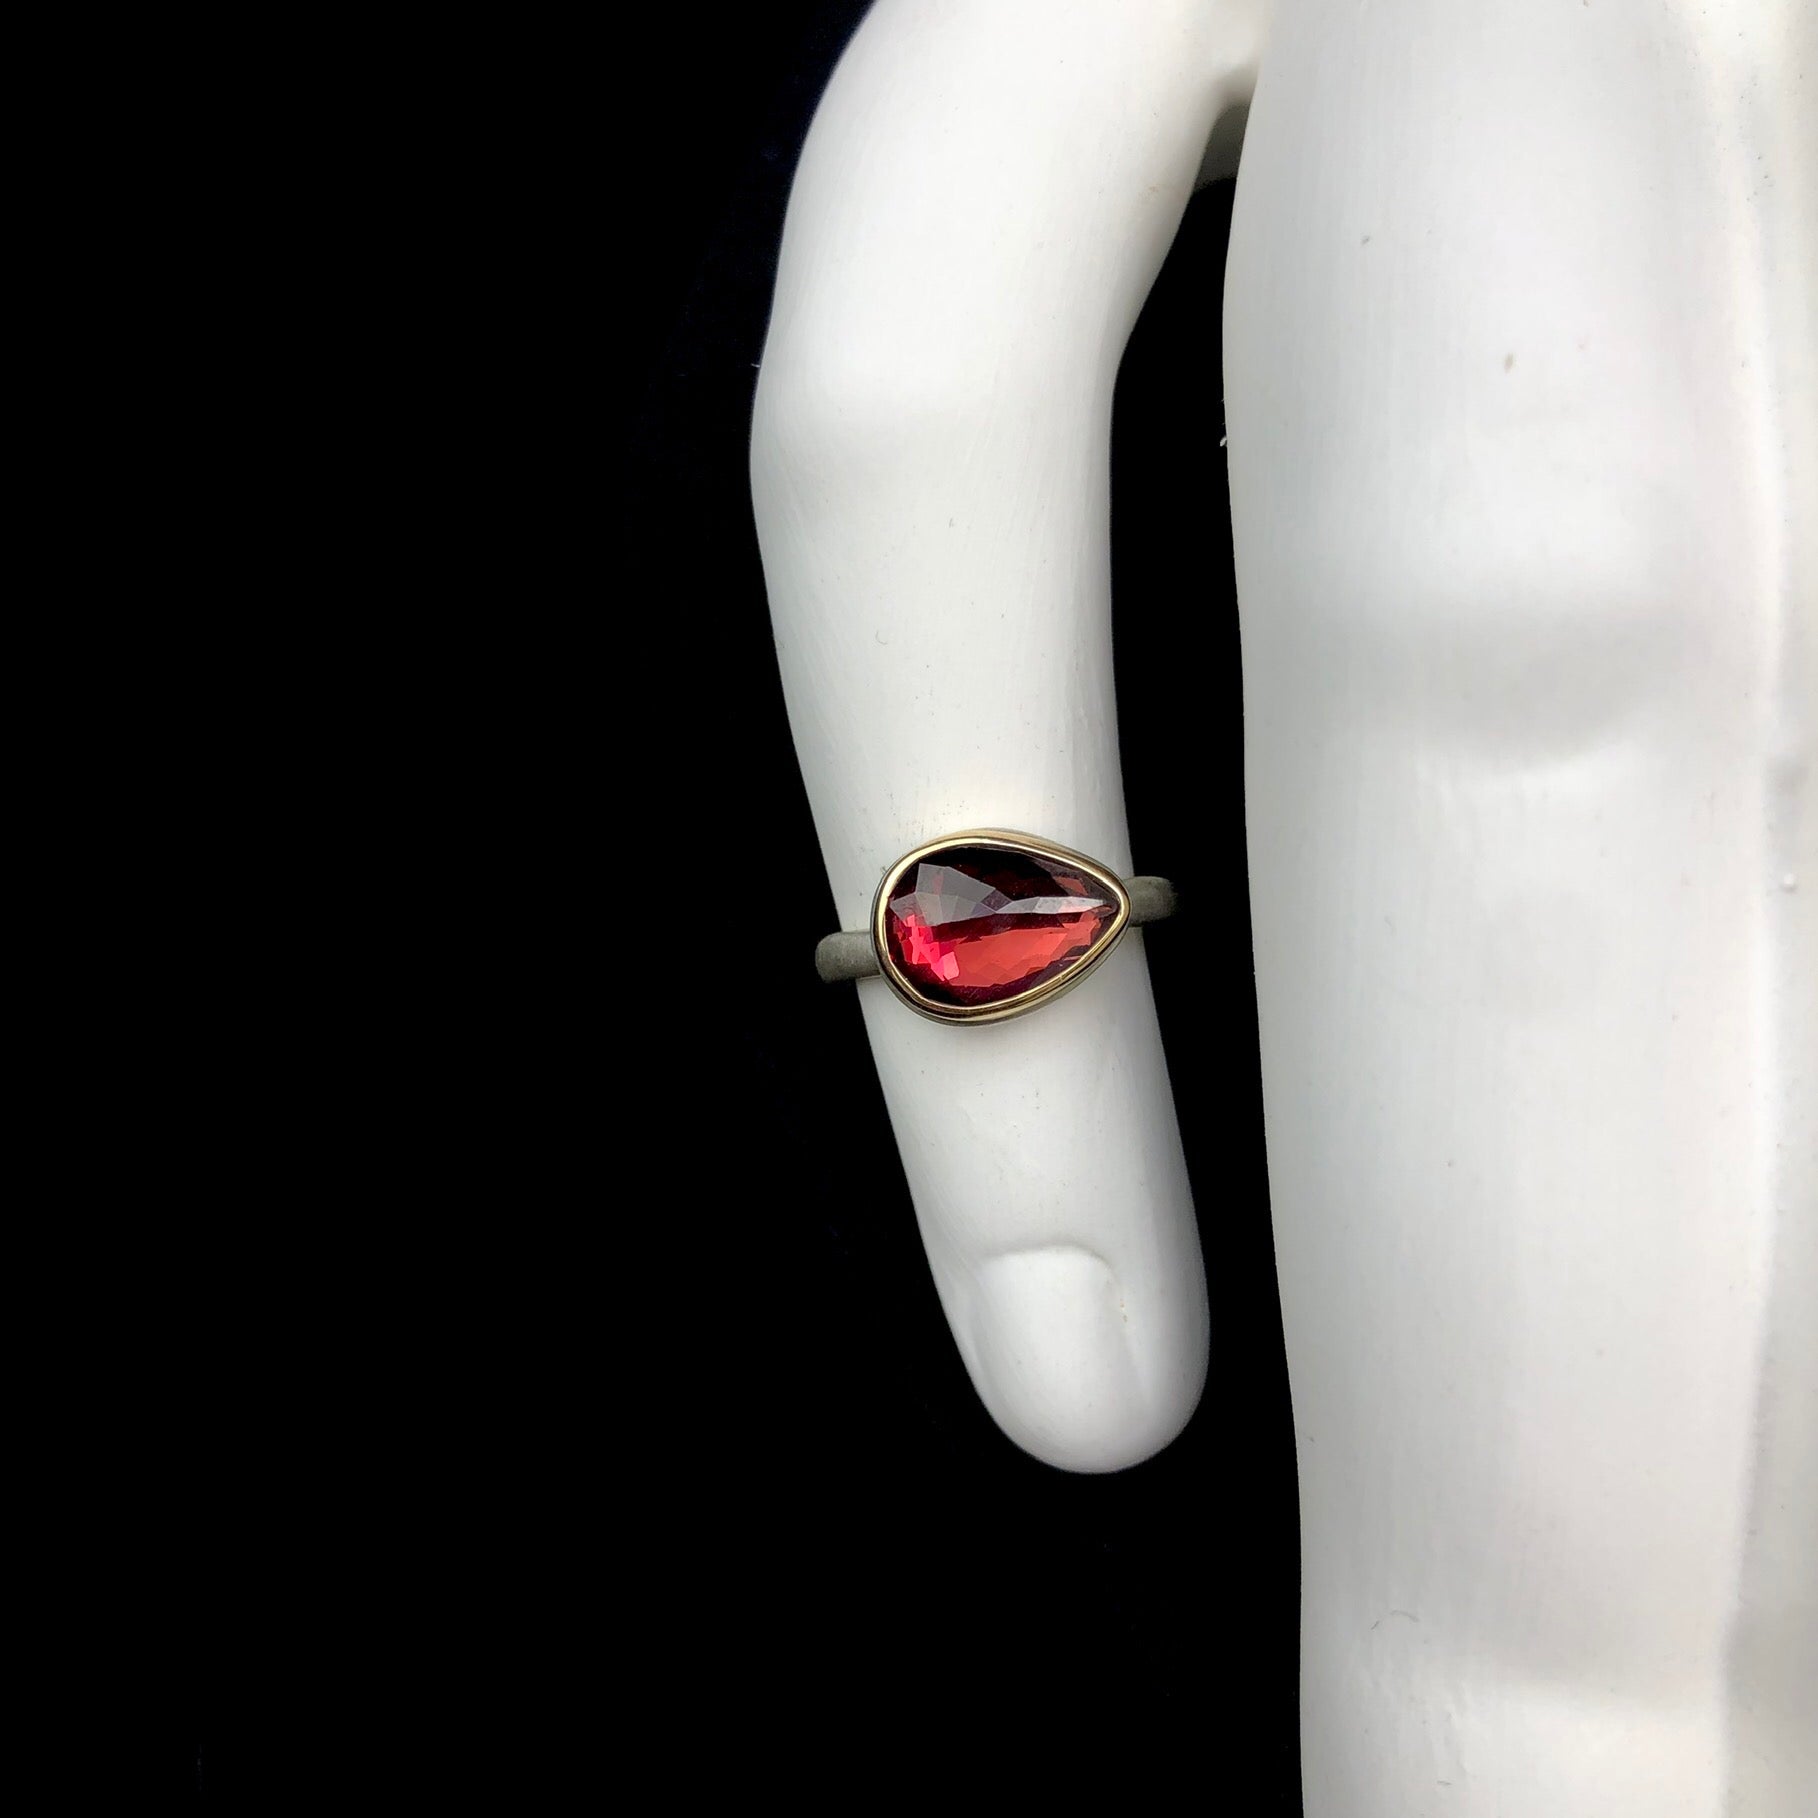 Red colored garnet stone ring with small facets on the surface shown on white ceramic hand